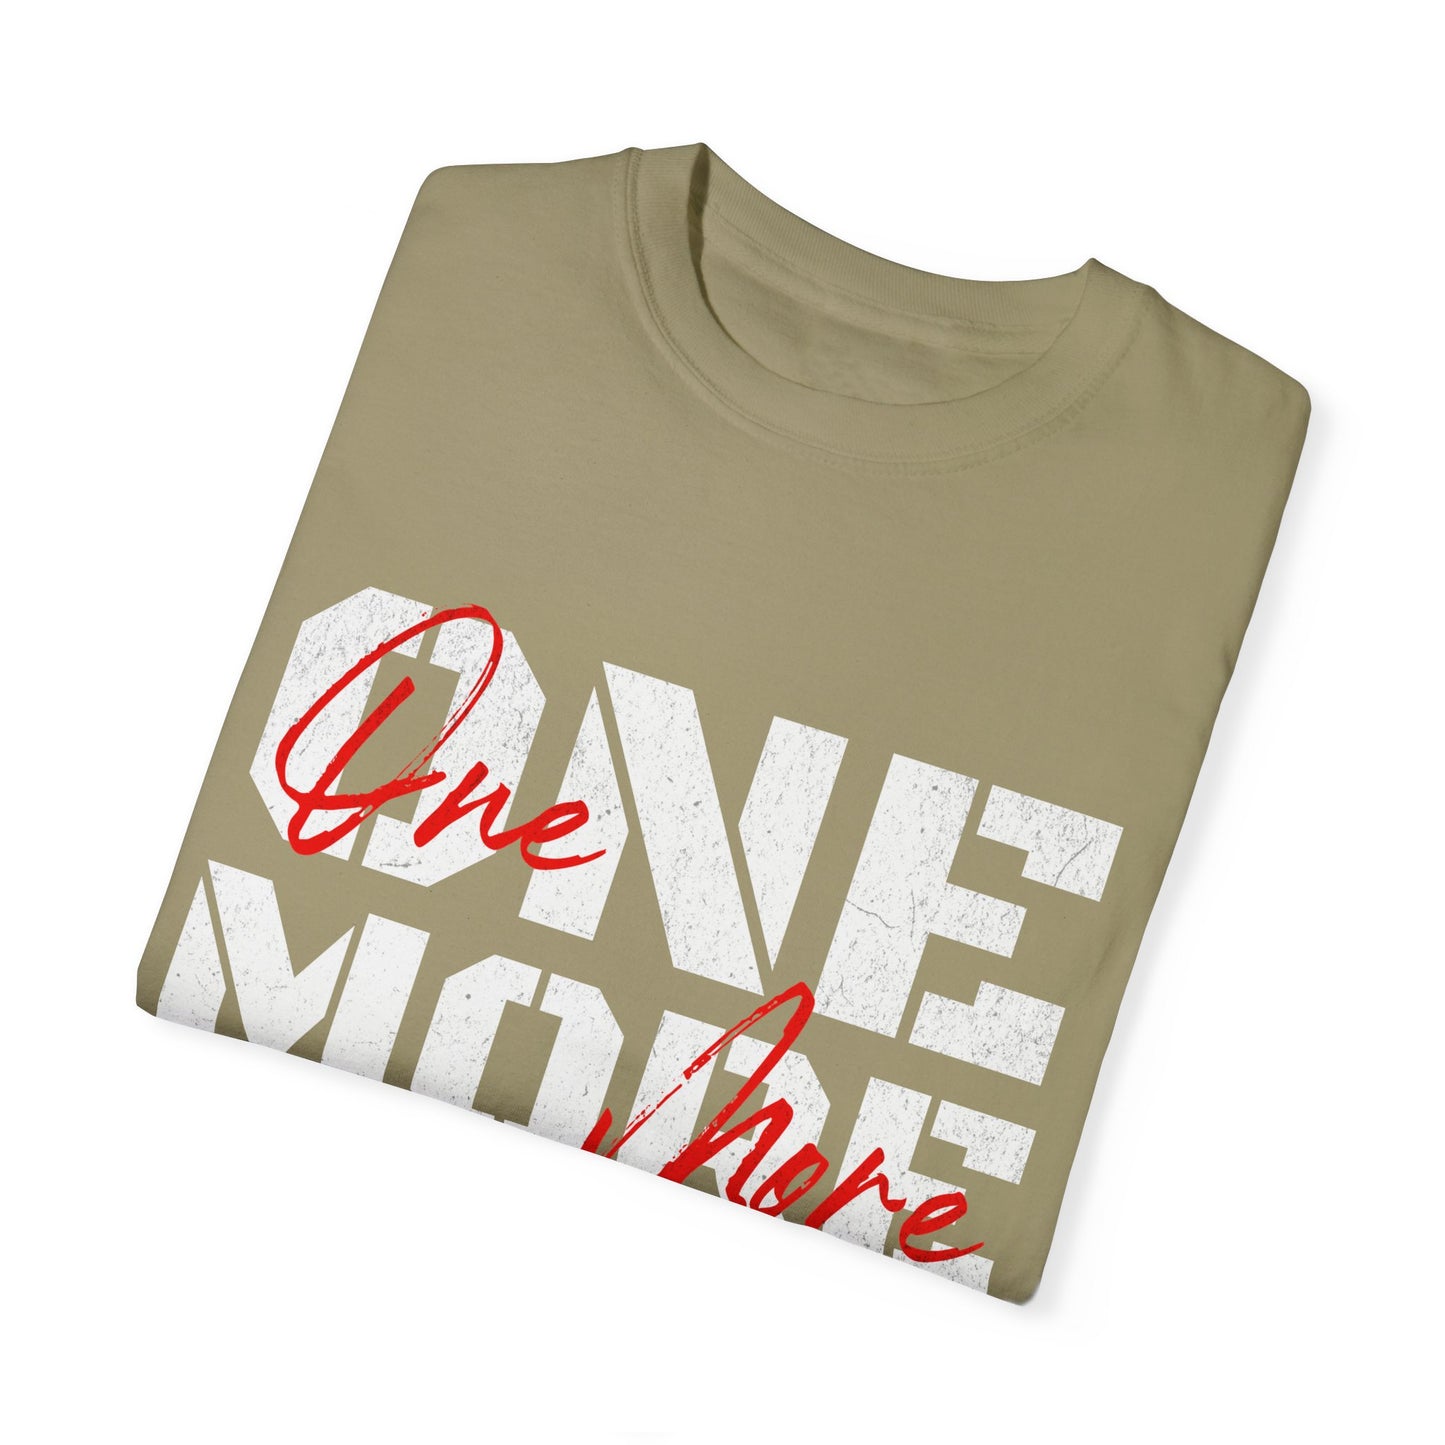 One More Rep Unisex Garment-Dyed T-shirt